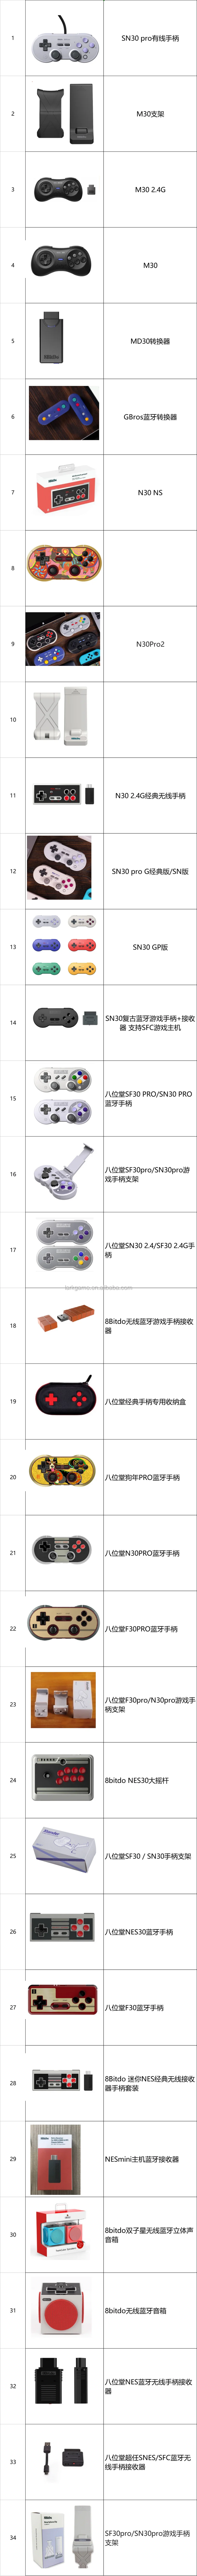 8bitdo ps4 to pc